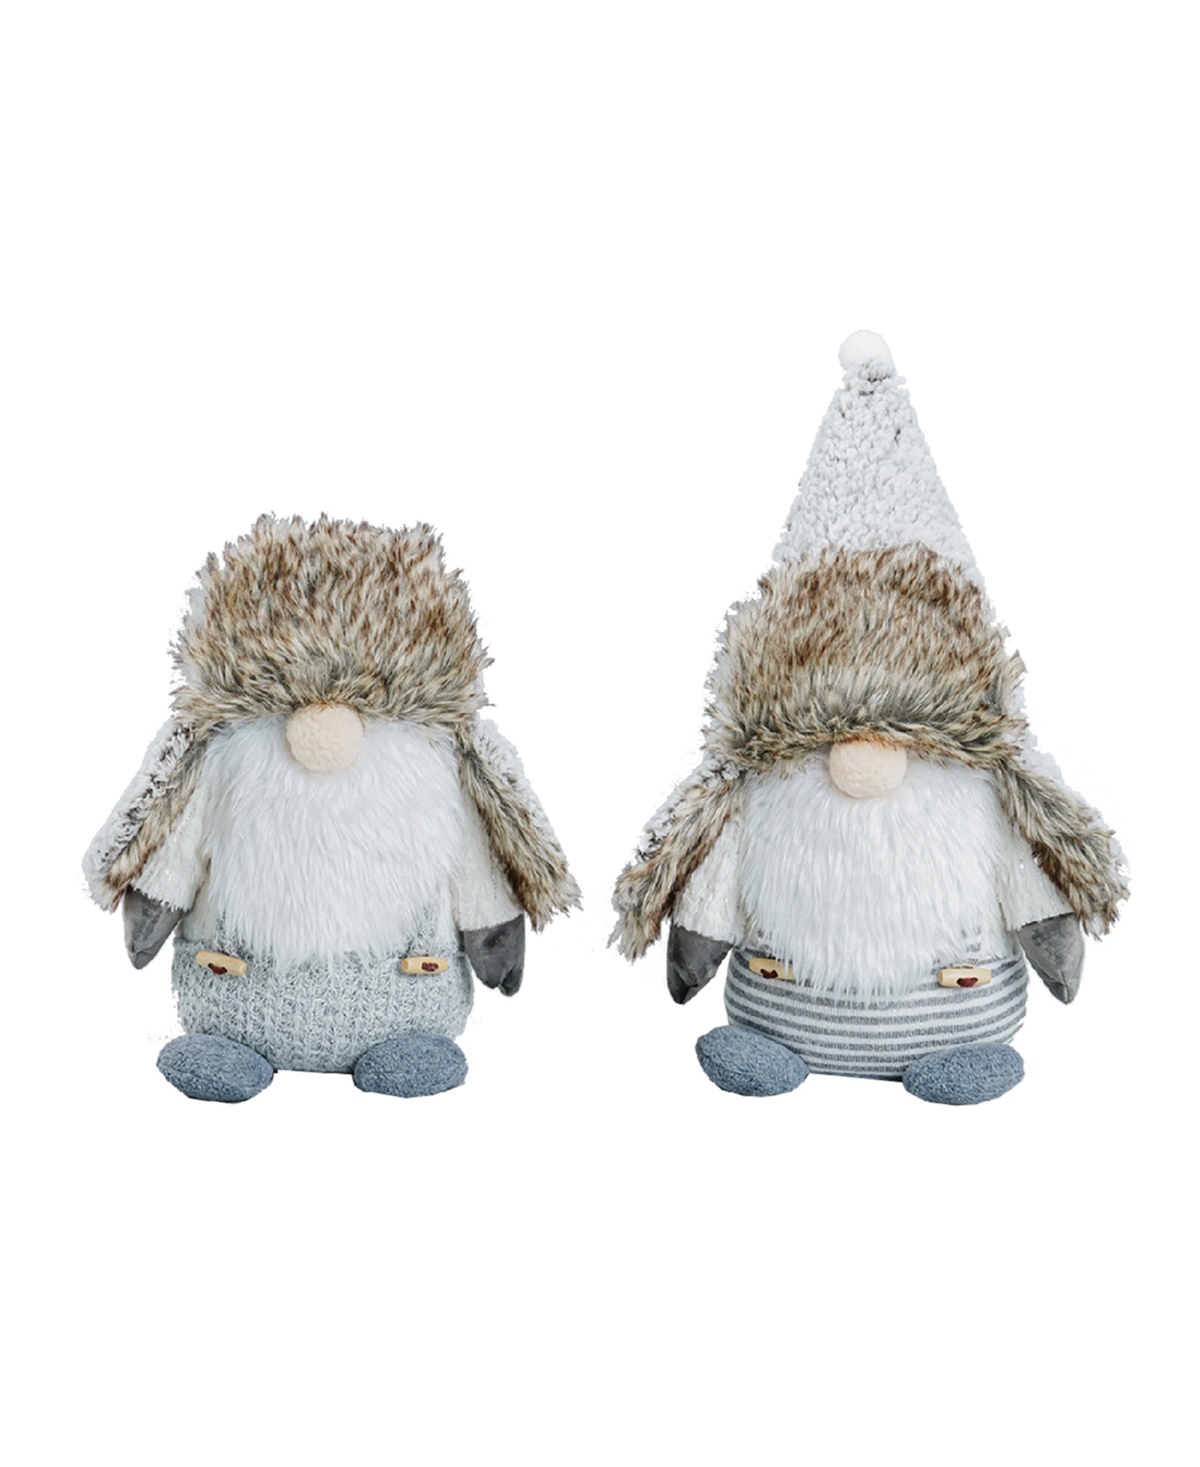 Santa's Workshop 12.5" Gnome Brothers, Set Of 2 In Gray